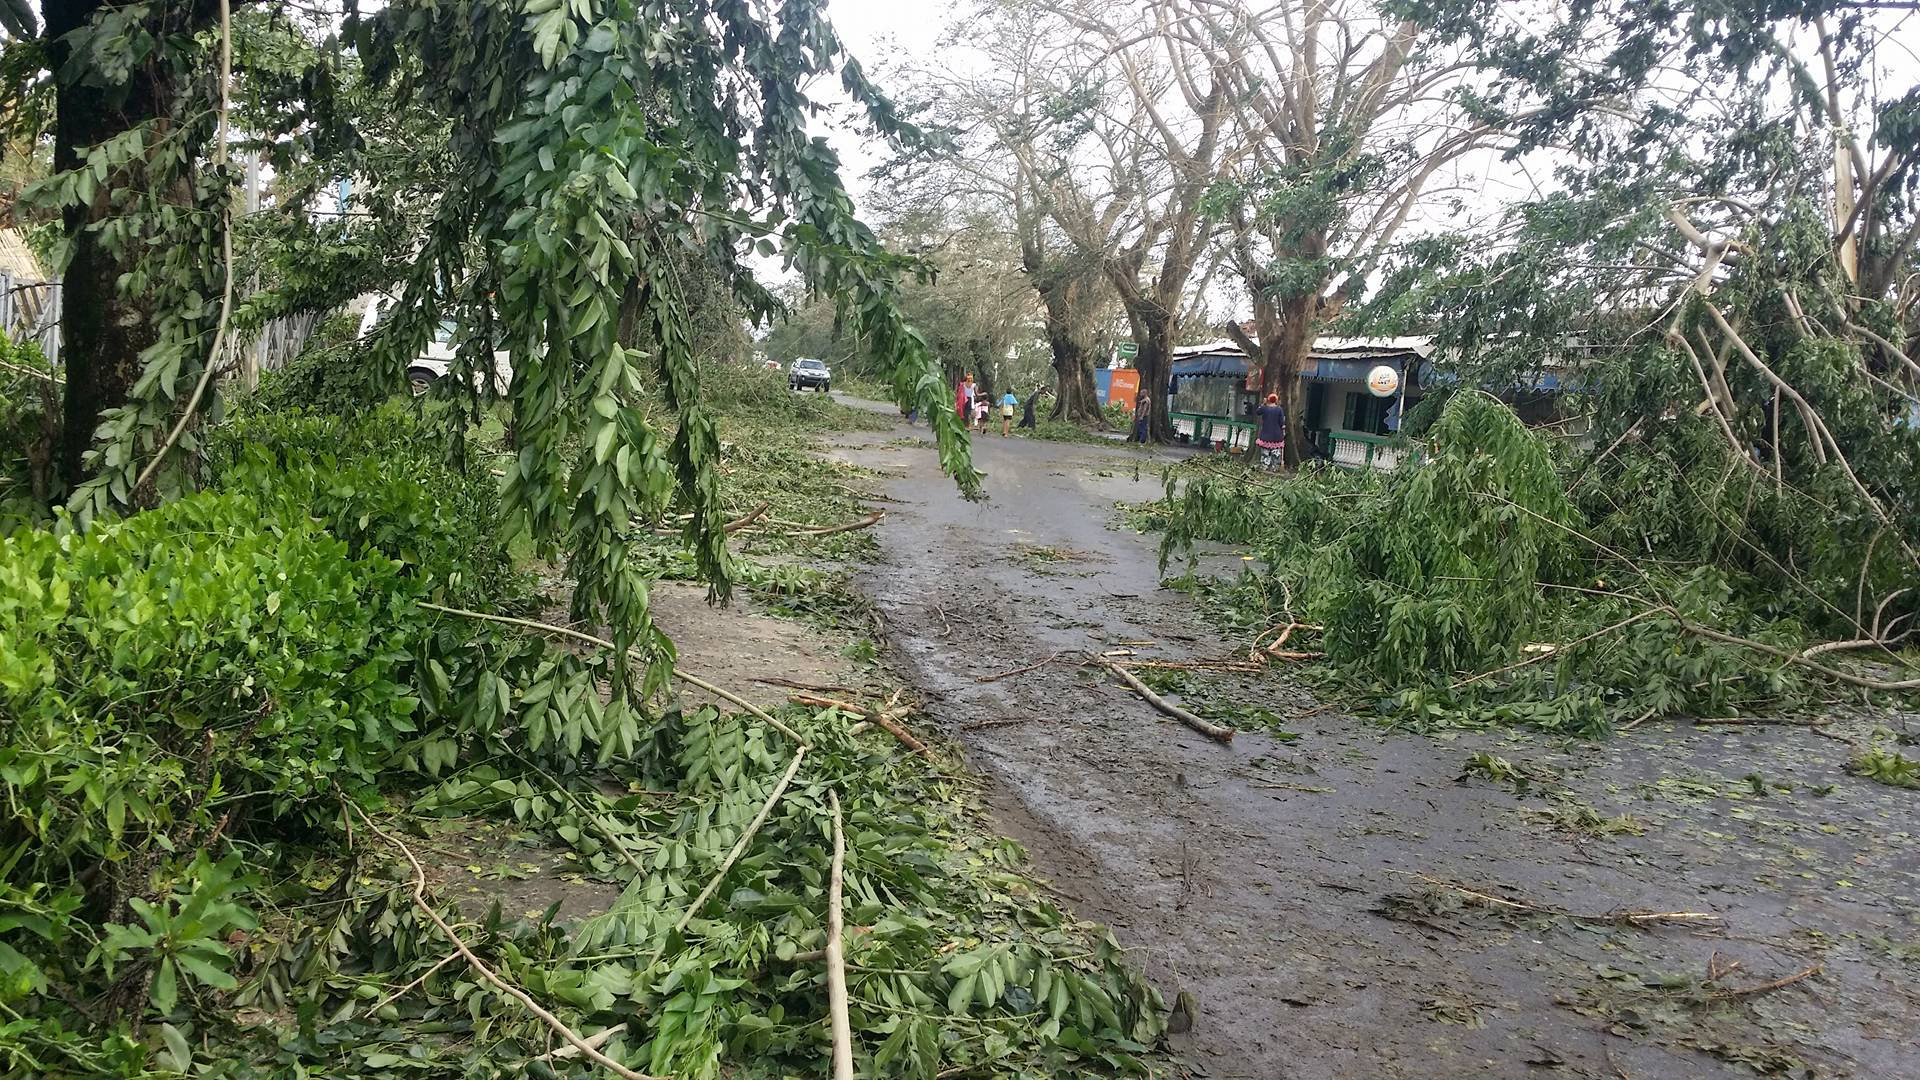 Aftermath of tropical cyclone Ava in Toamasina